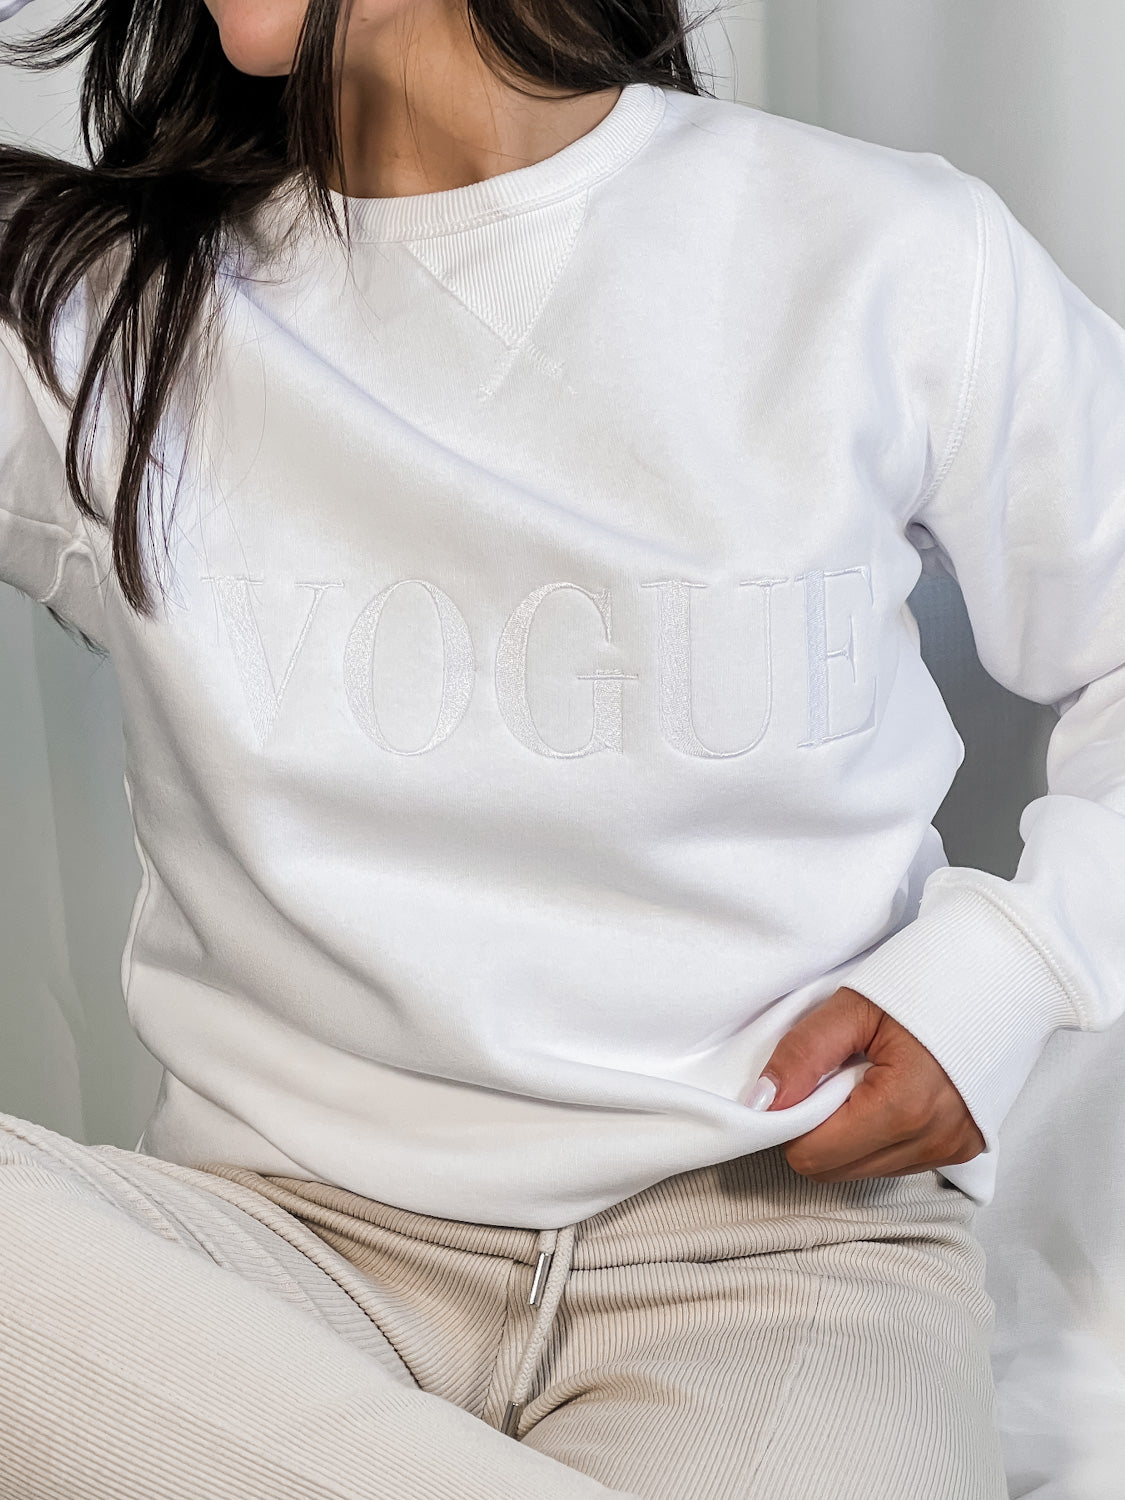 Out The Purse In Style Embroidered Sweatshirt white